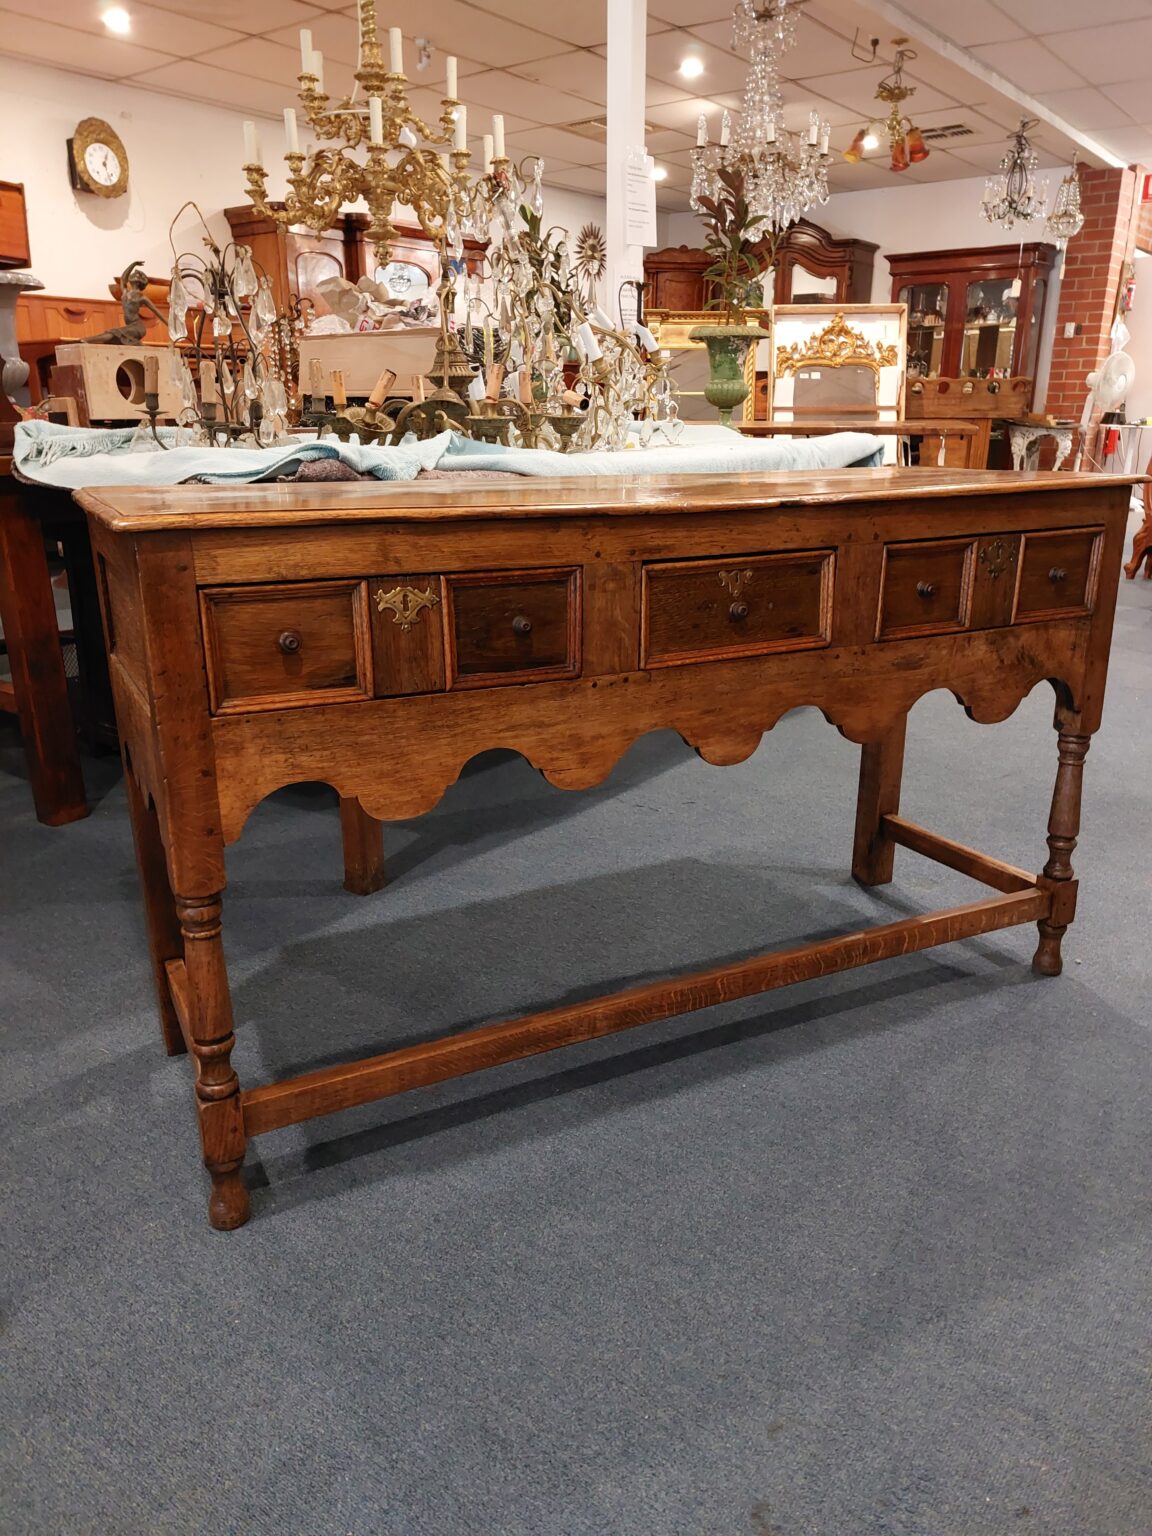 English oak side table with 3 Drawers and scalloped apron. C:1750. Town and Country Antiques